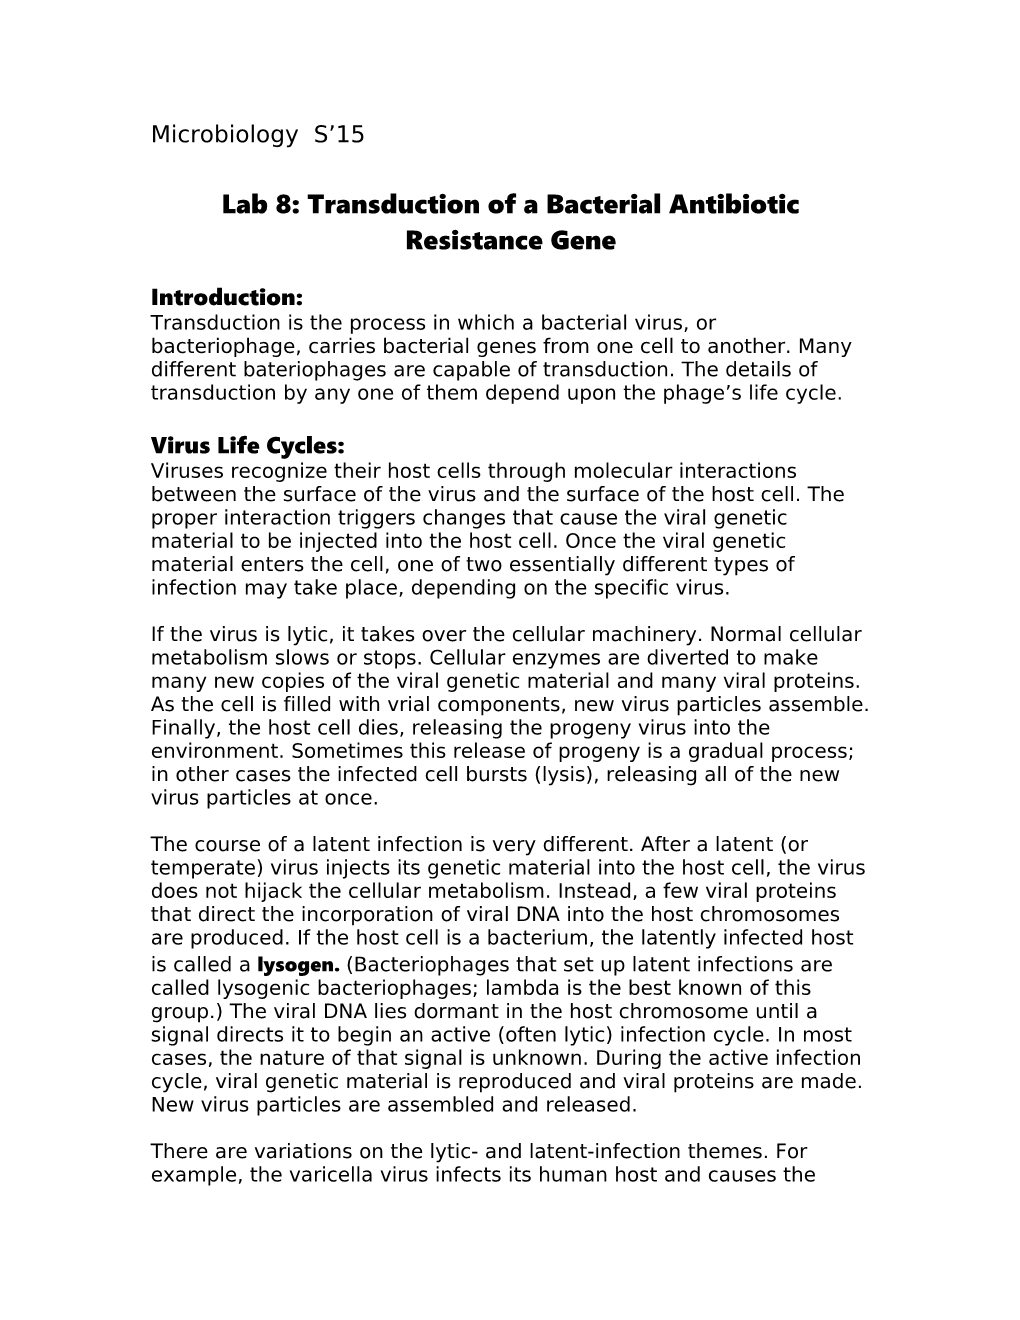 Lab 8: Transduction of a Bacterial Antibiotic Resistance Gene